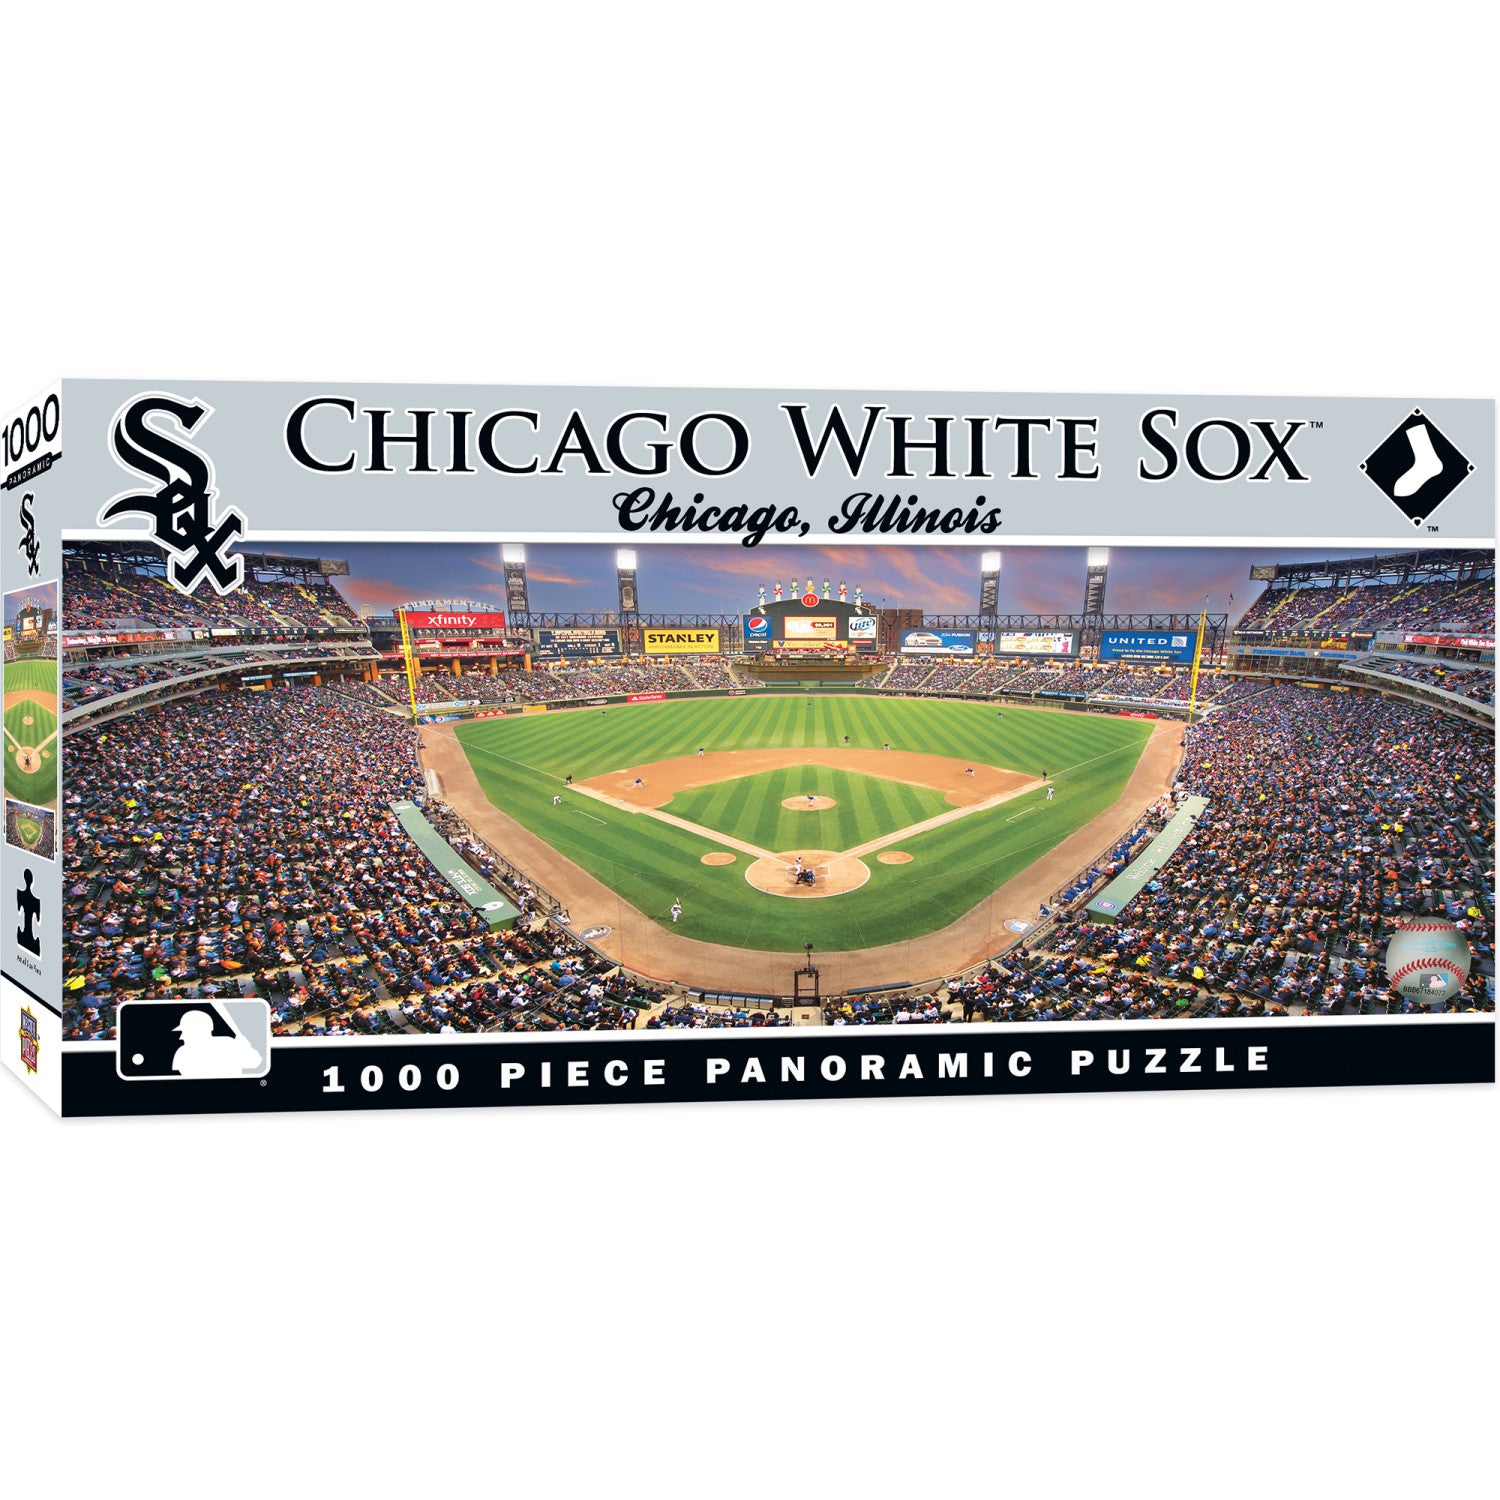 Chicago White Sox - 1000 Piece Panoramic Puzzle